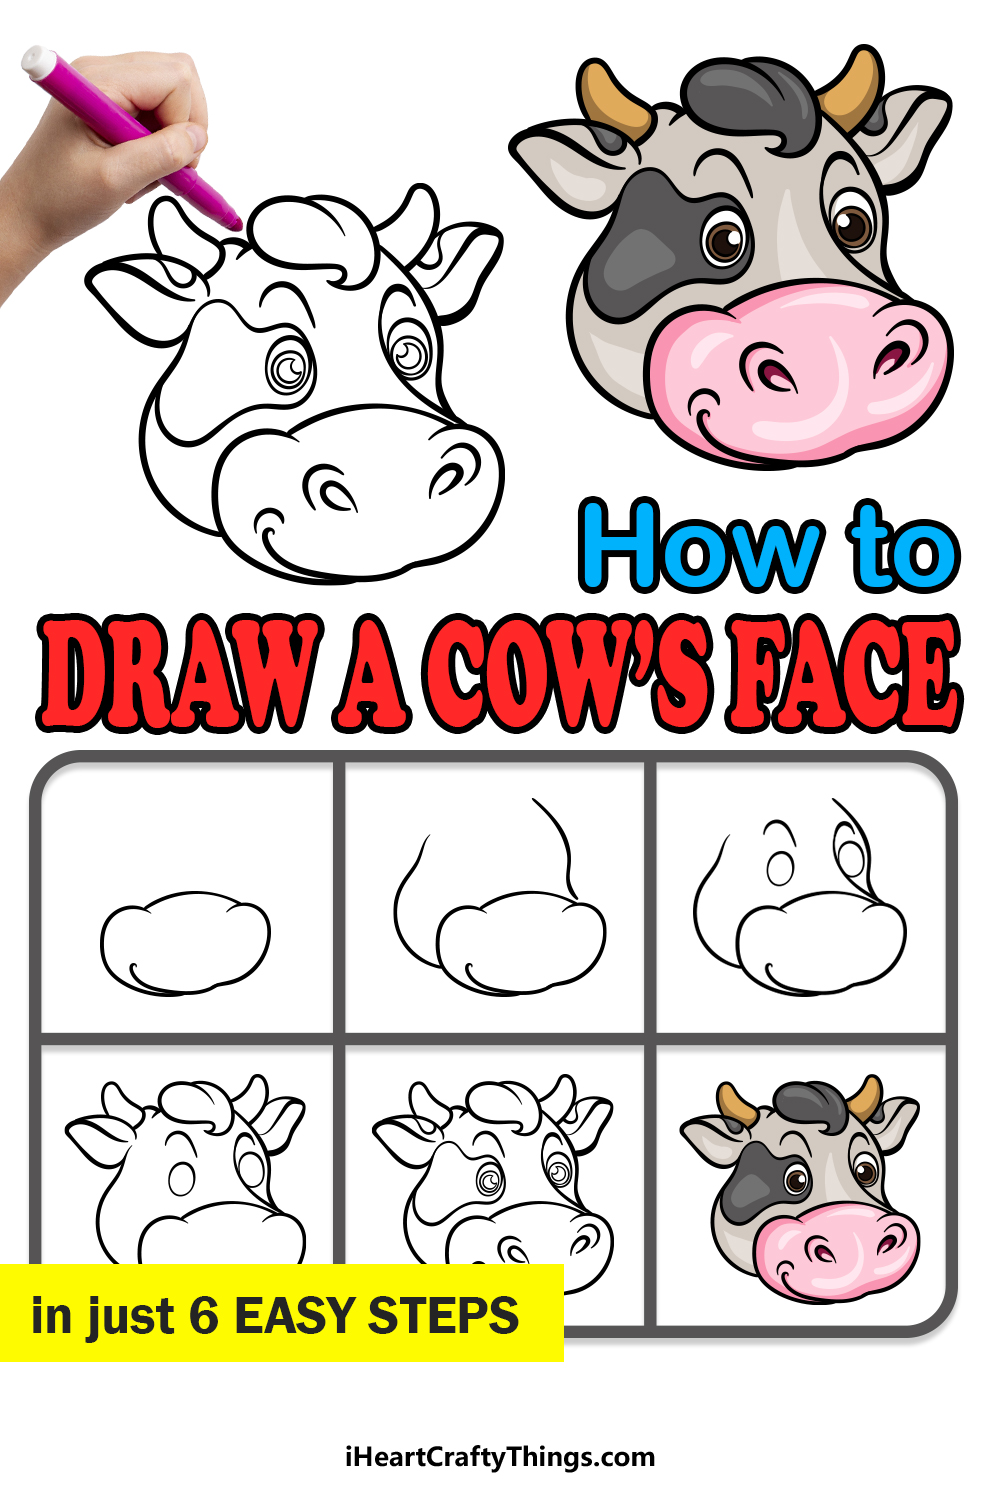 how to draw a Cow’s Face in 6 easy steps